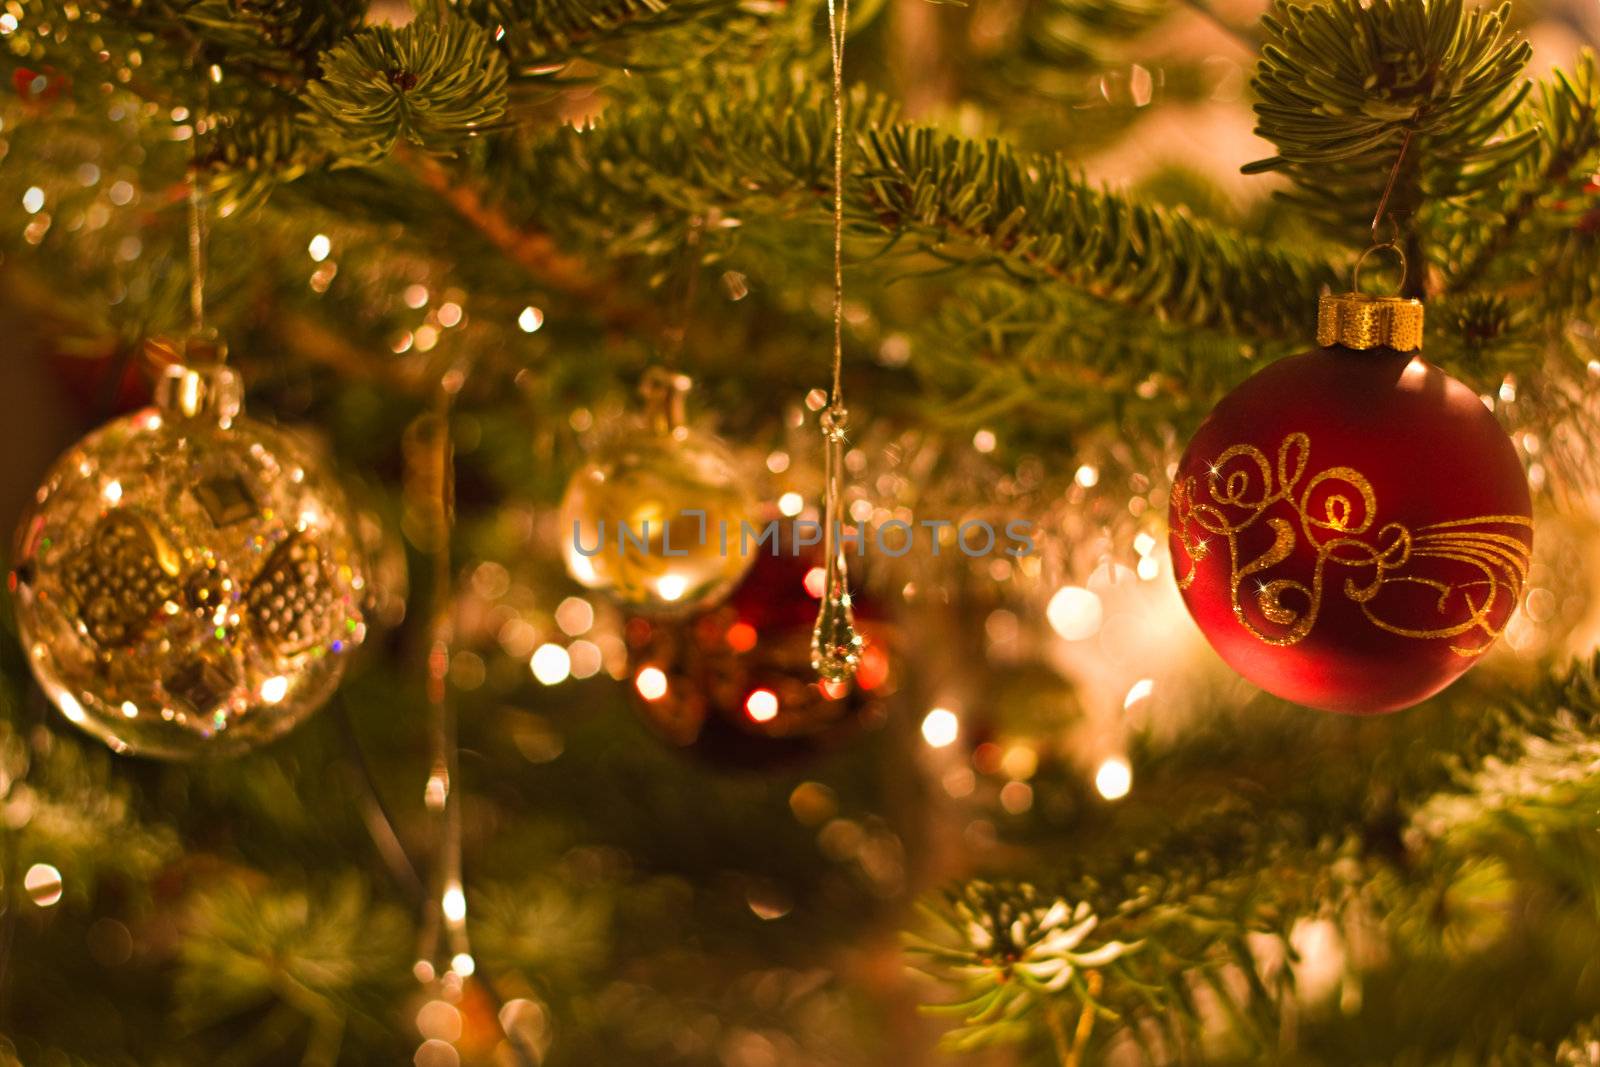 Decoration in christmas tree - shallow dof by Colette